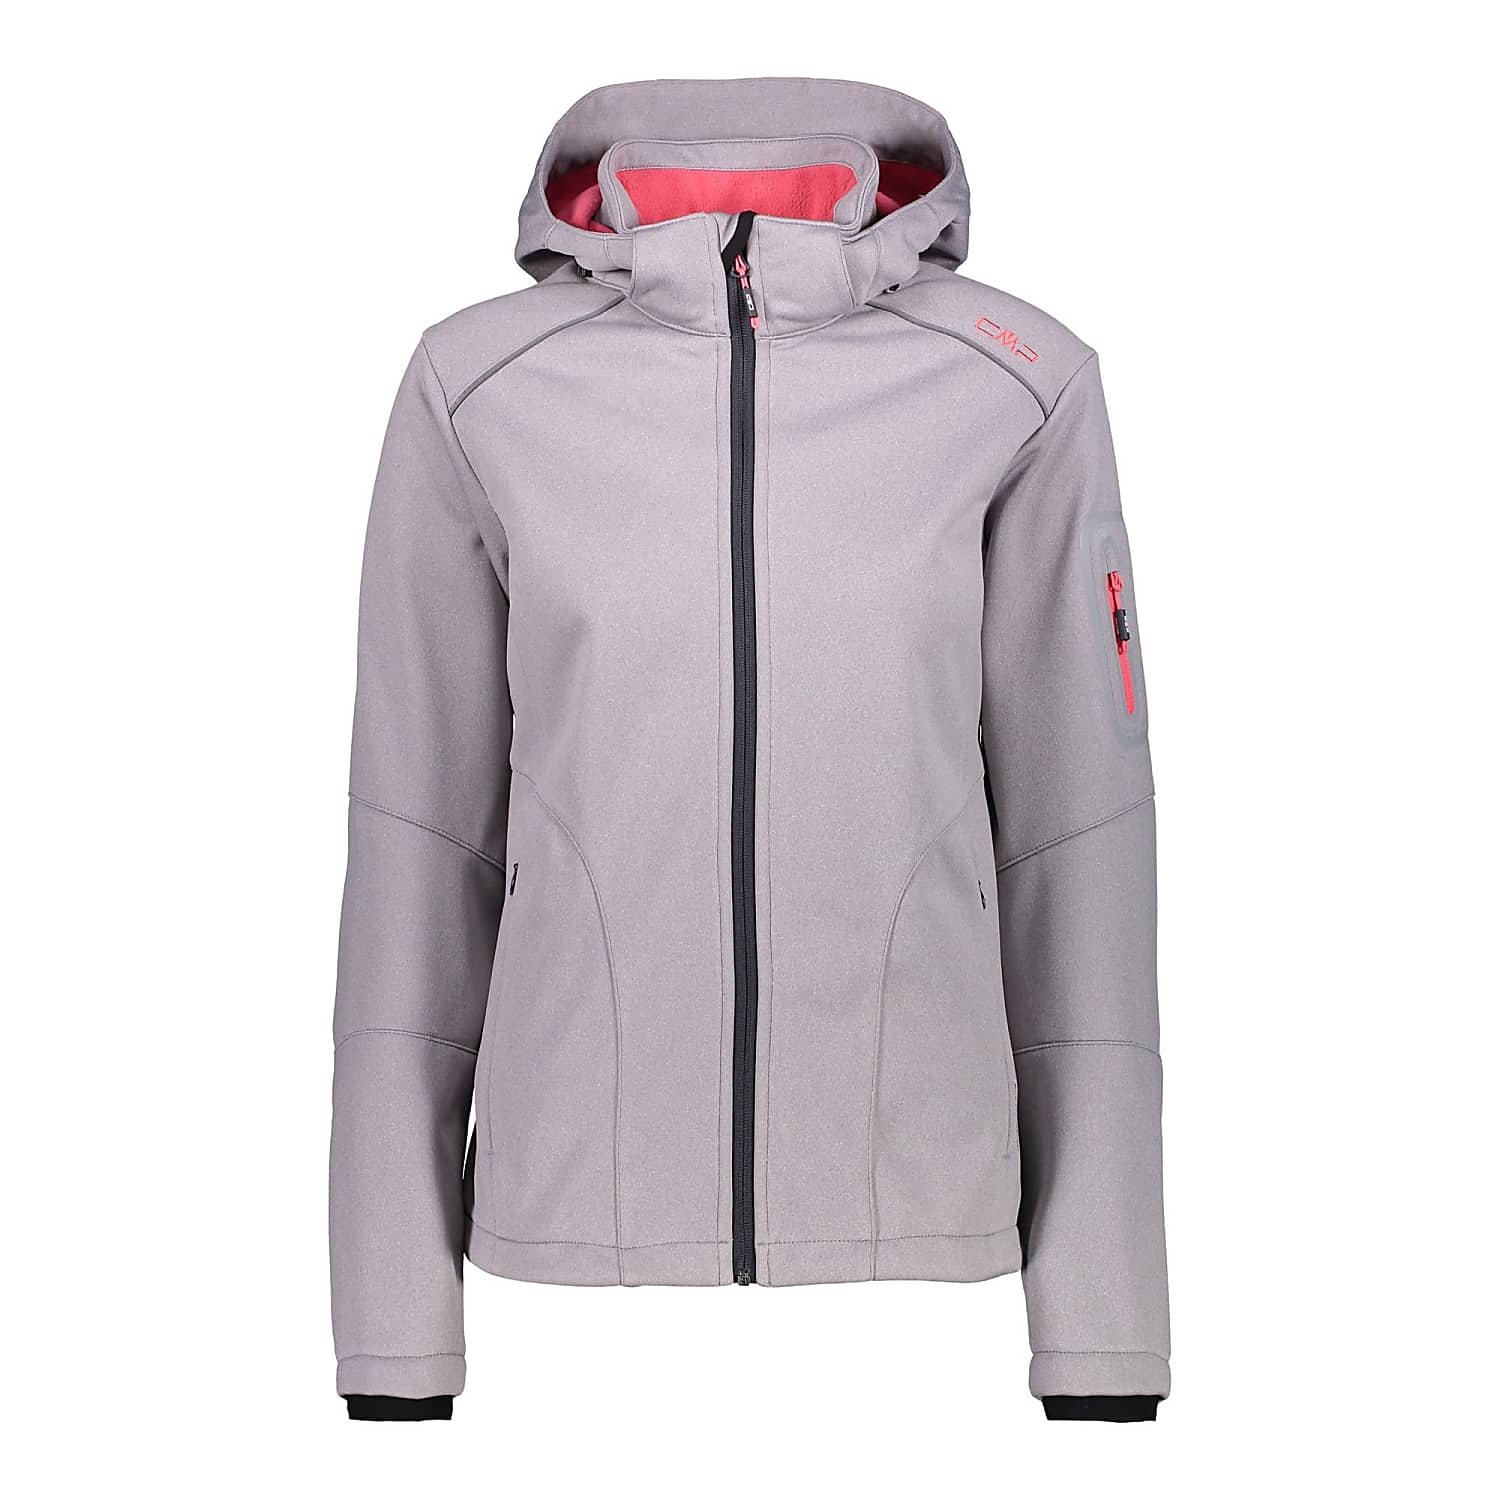 CMP W JACKET and - Argento HOOD cheap Fast SOFTSHELL, Mel. Corallo shipping - ZIP